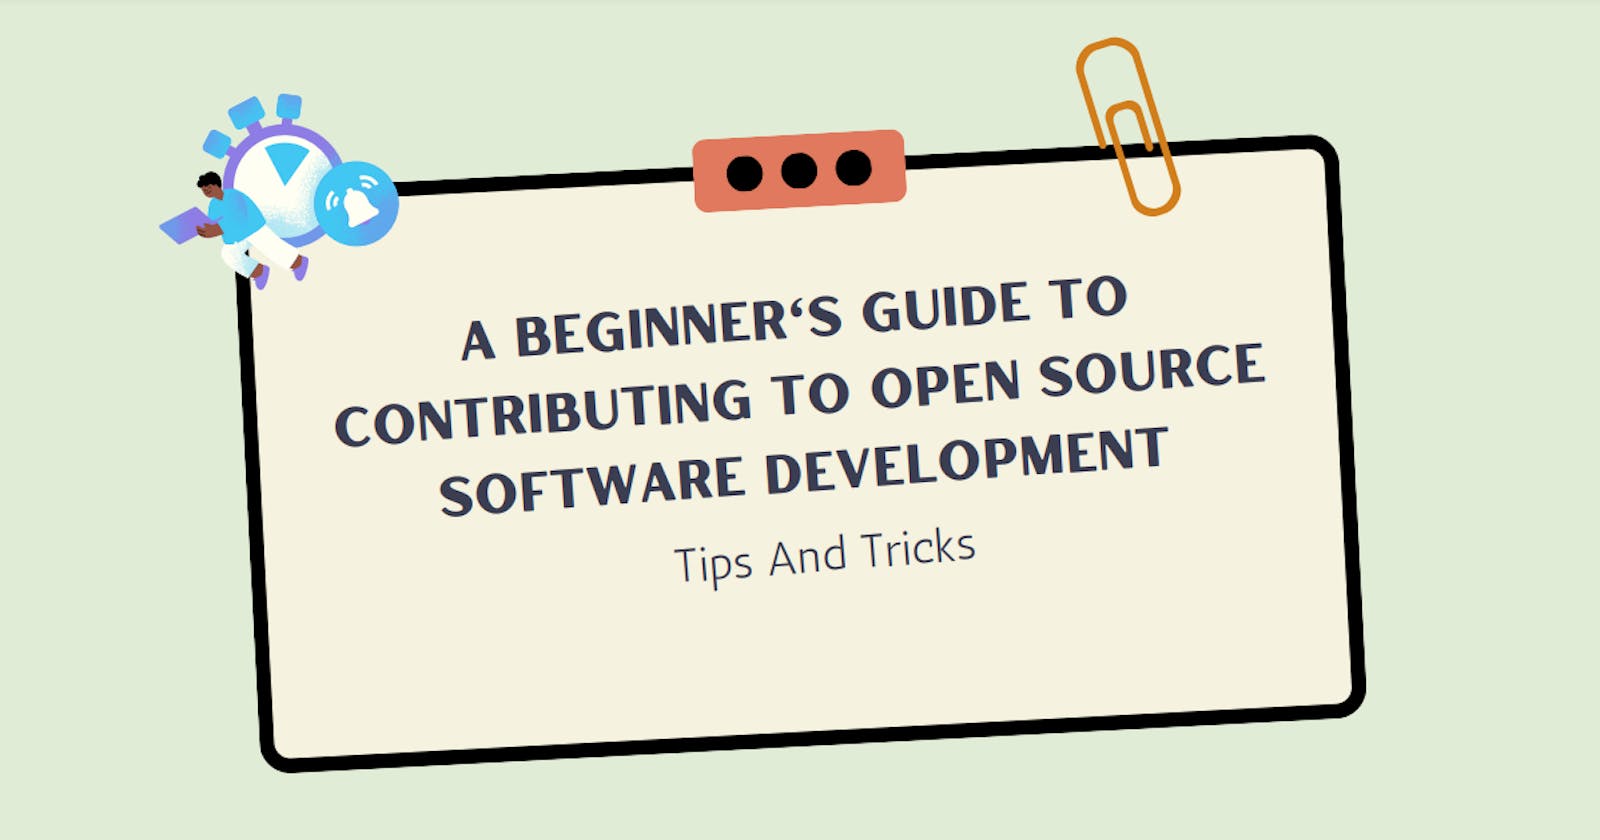 A Beginner's Guide To Contributing To Open Source Software Development